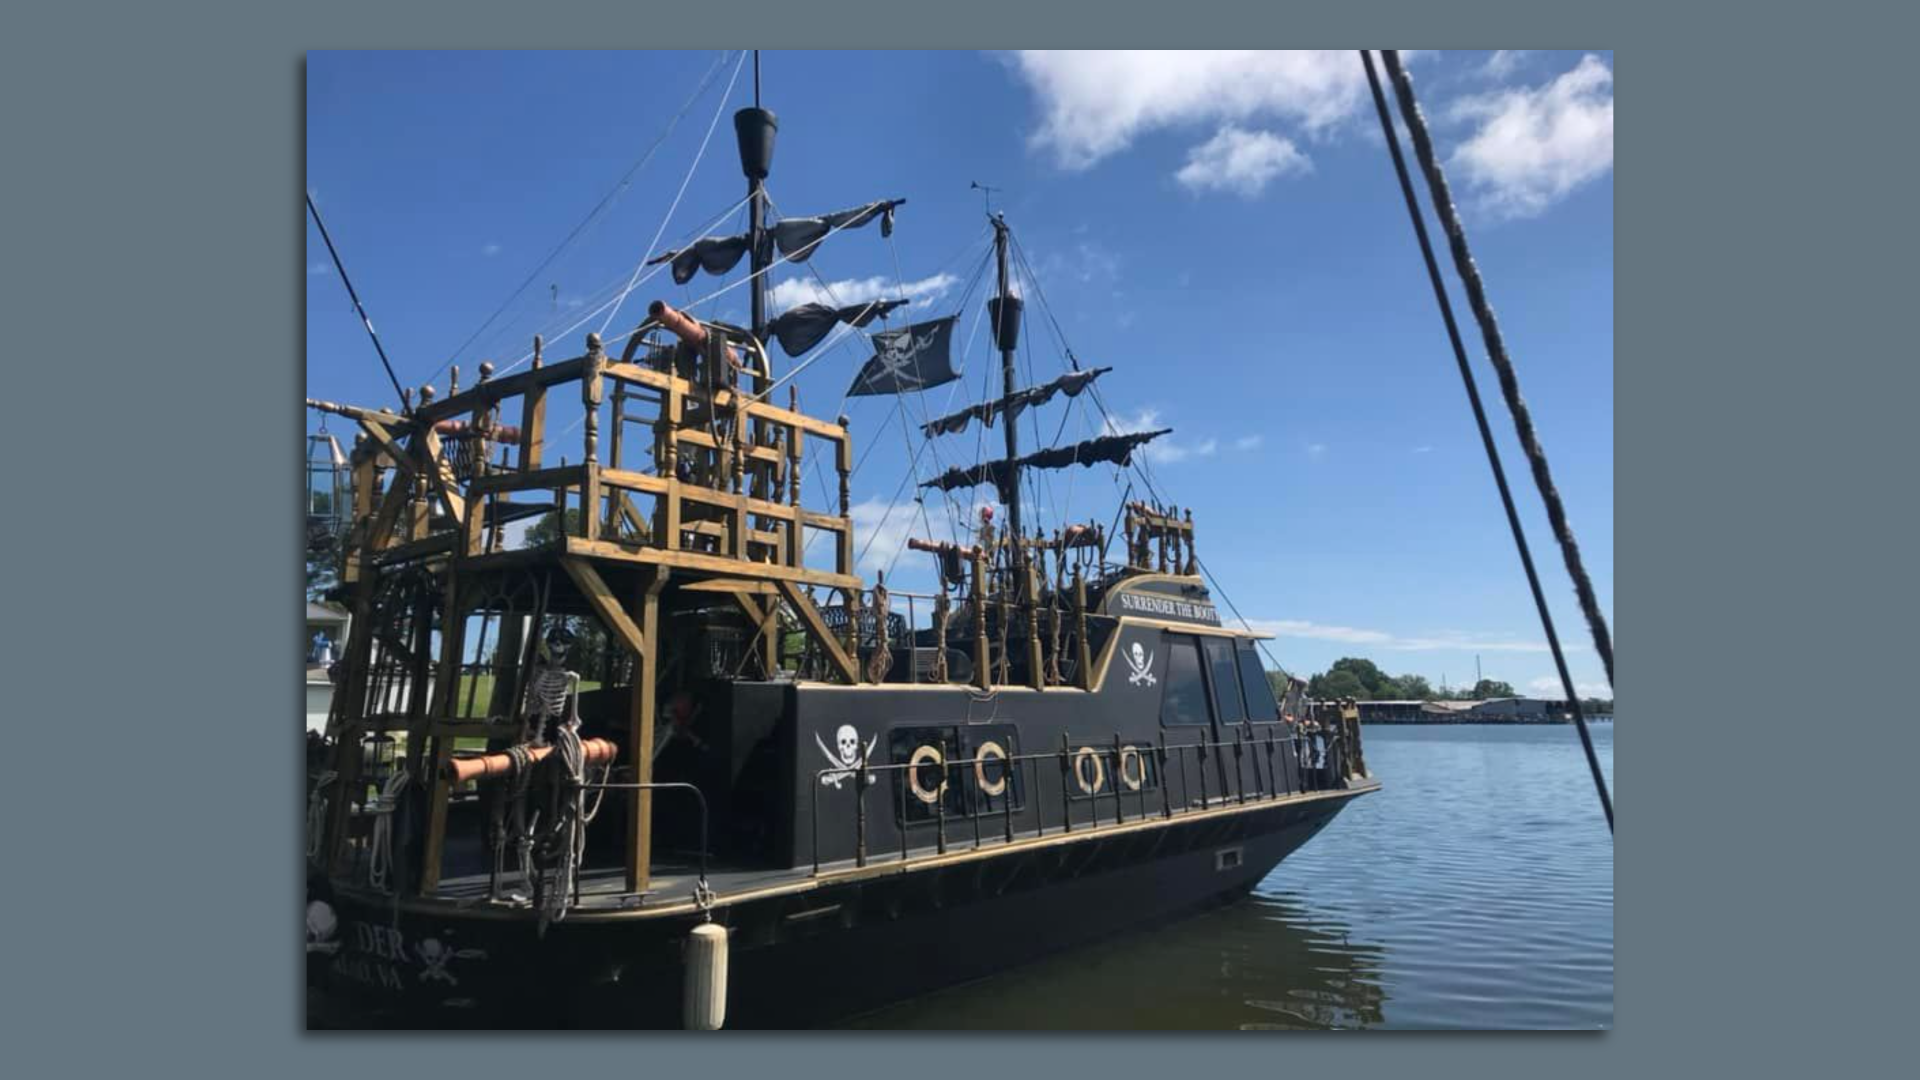 A houseboat that looks like pirate ship